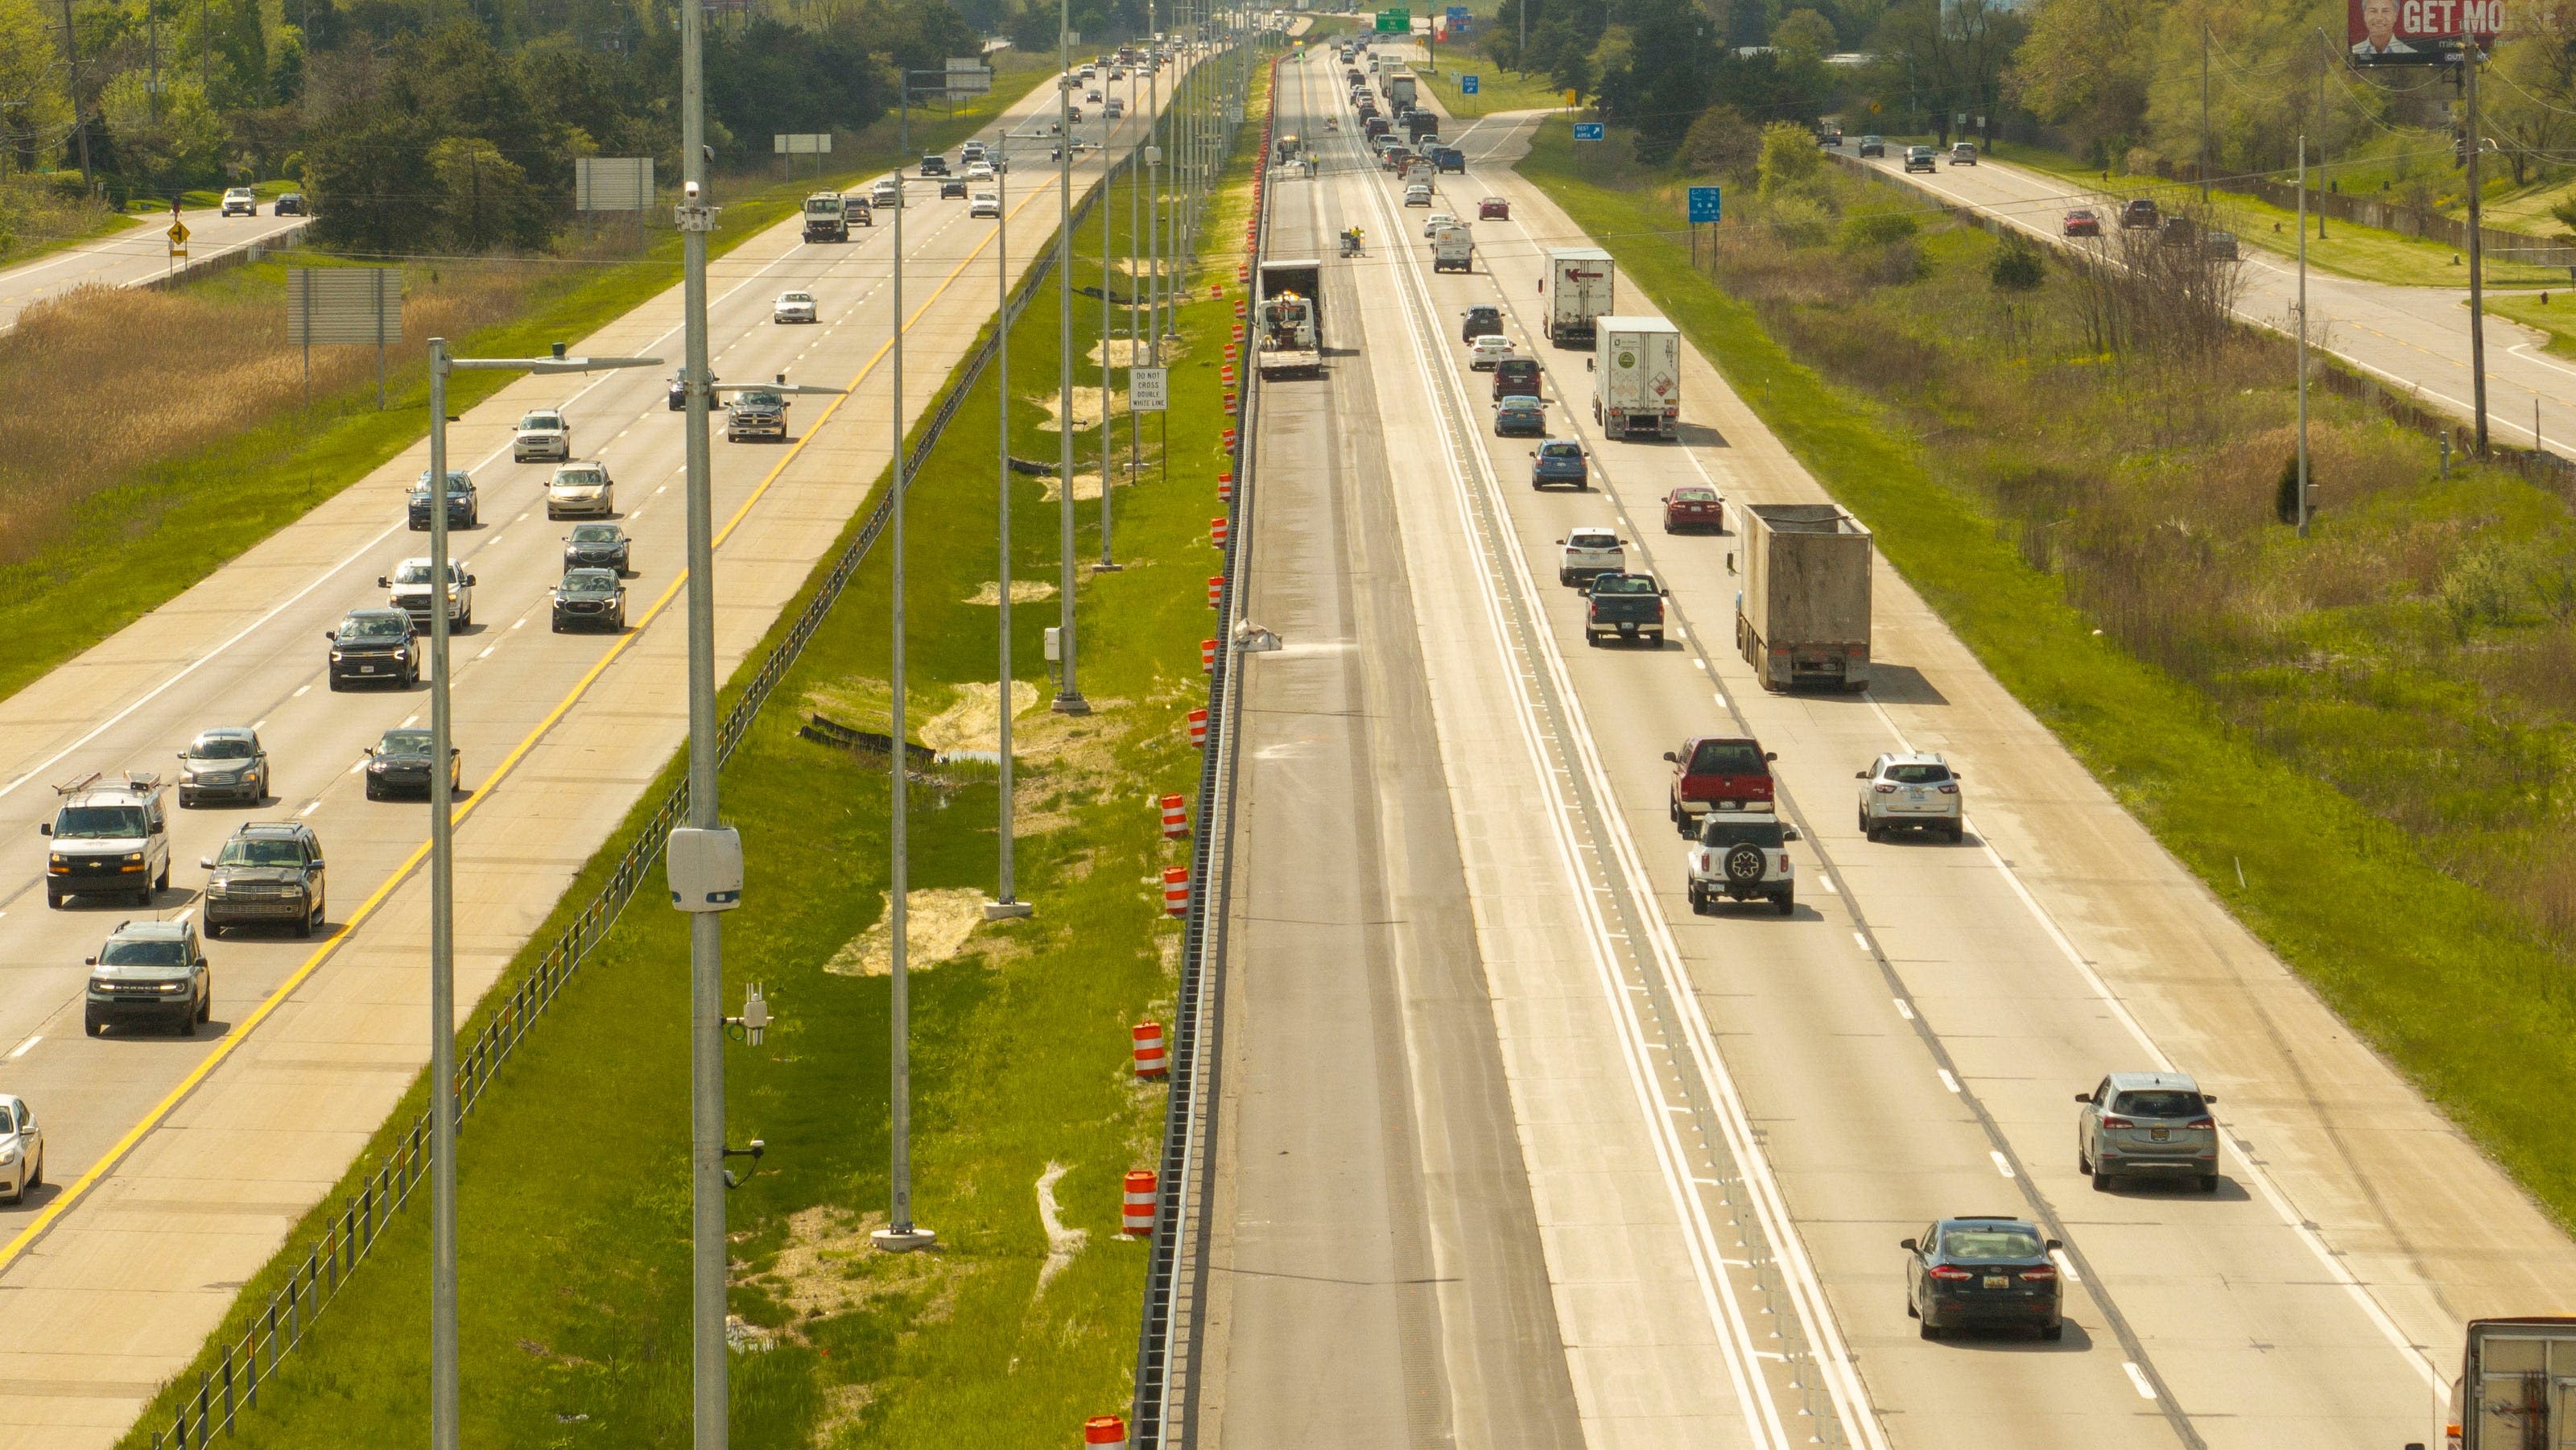 Testing underway for 'smart road' pilot project on I-94 between Wayne and Washtenaw counties